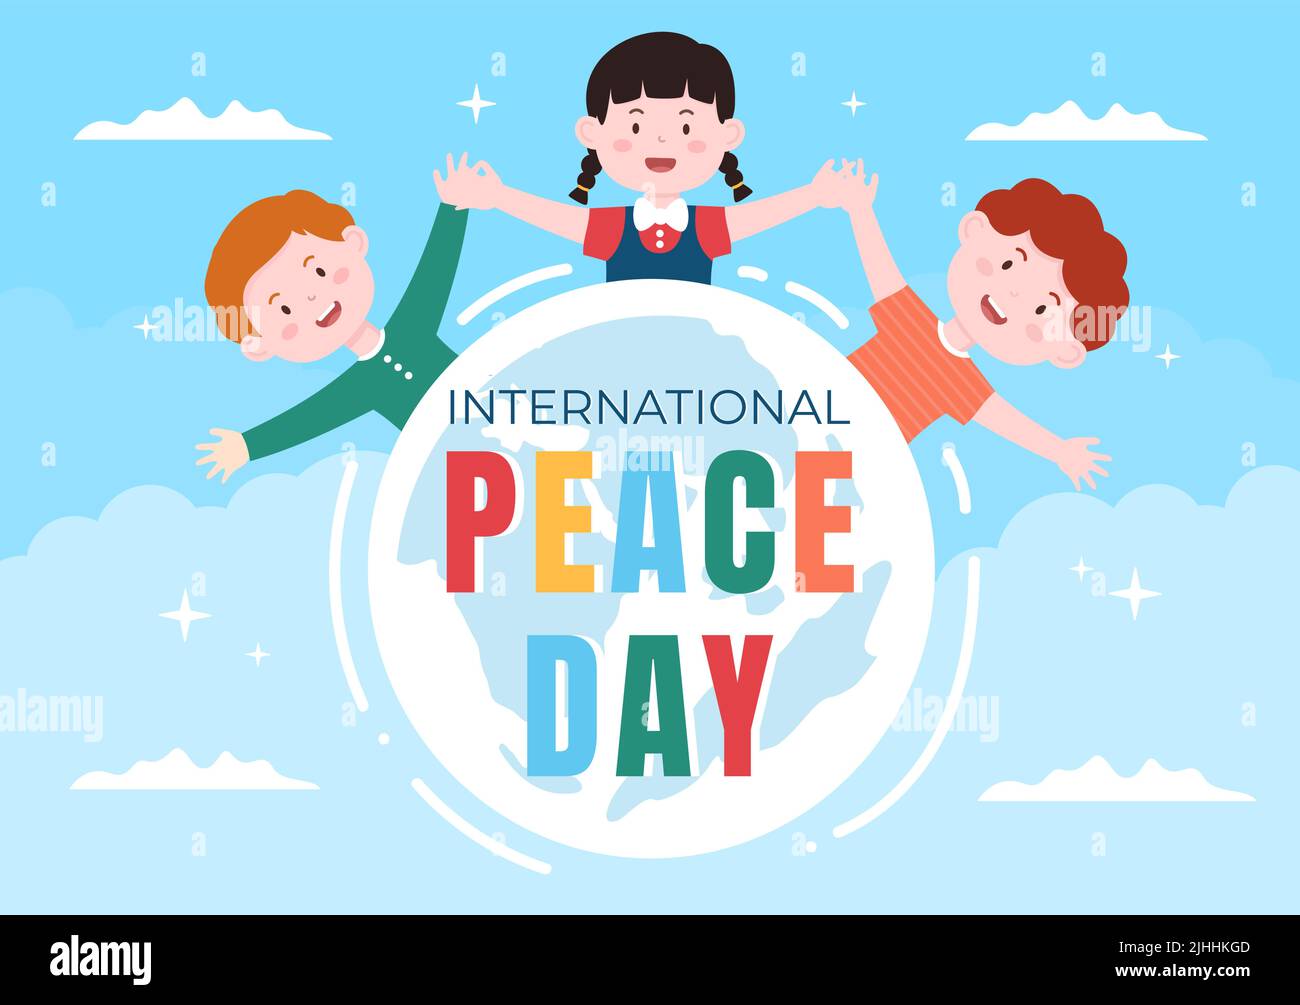 Children Stick Figure Playing Around the Globe, in it is Written English:  Peace No War Save Our Children Stock Illustration - Illustration of energy,  blue: 271349811